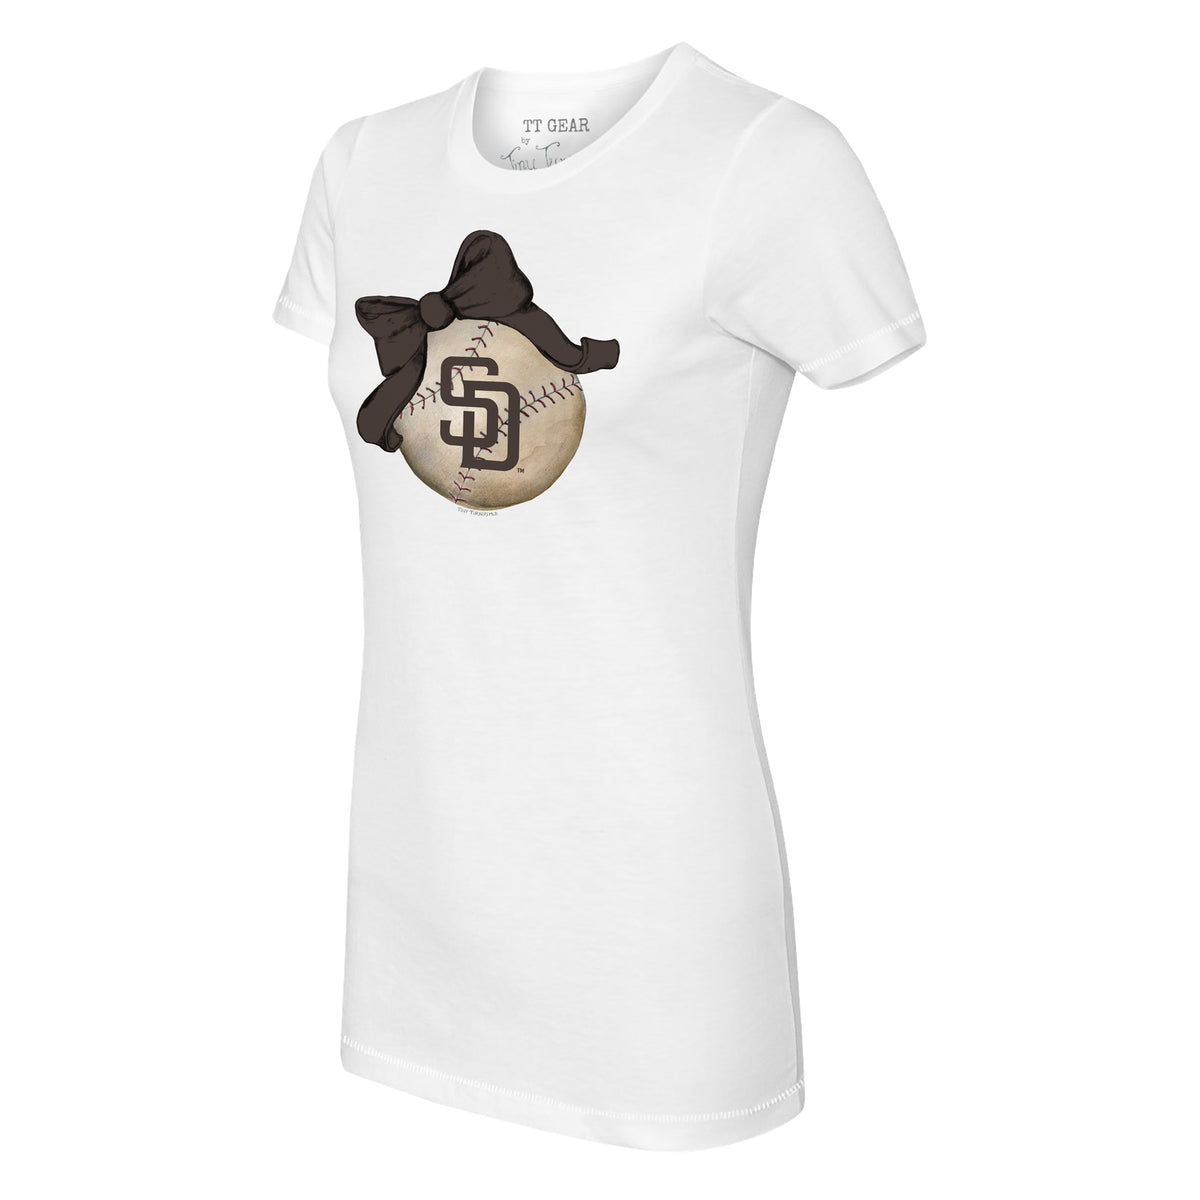 Official Women's San Diego Padres Gear, Womens Padres Apparel